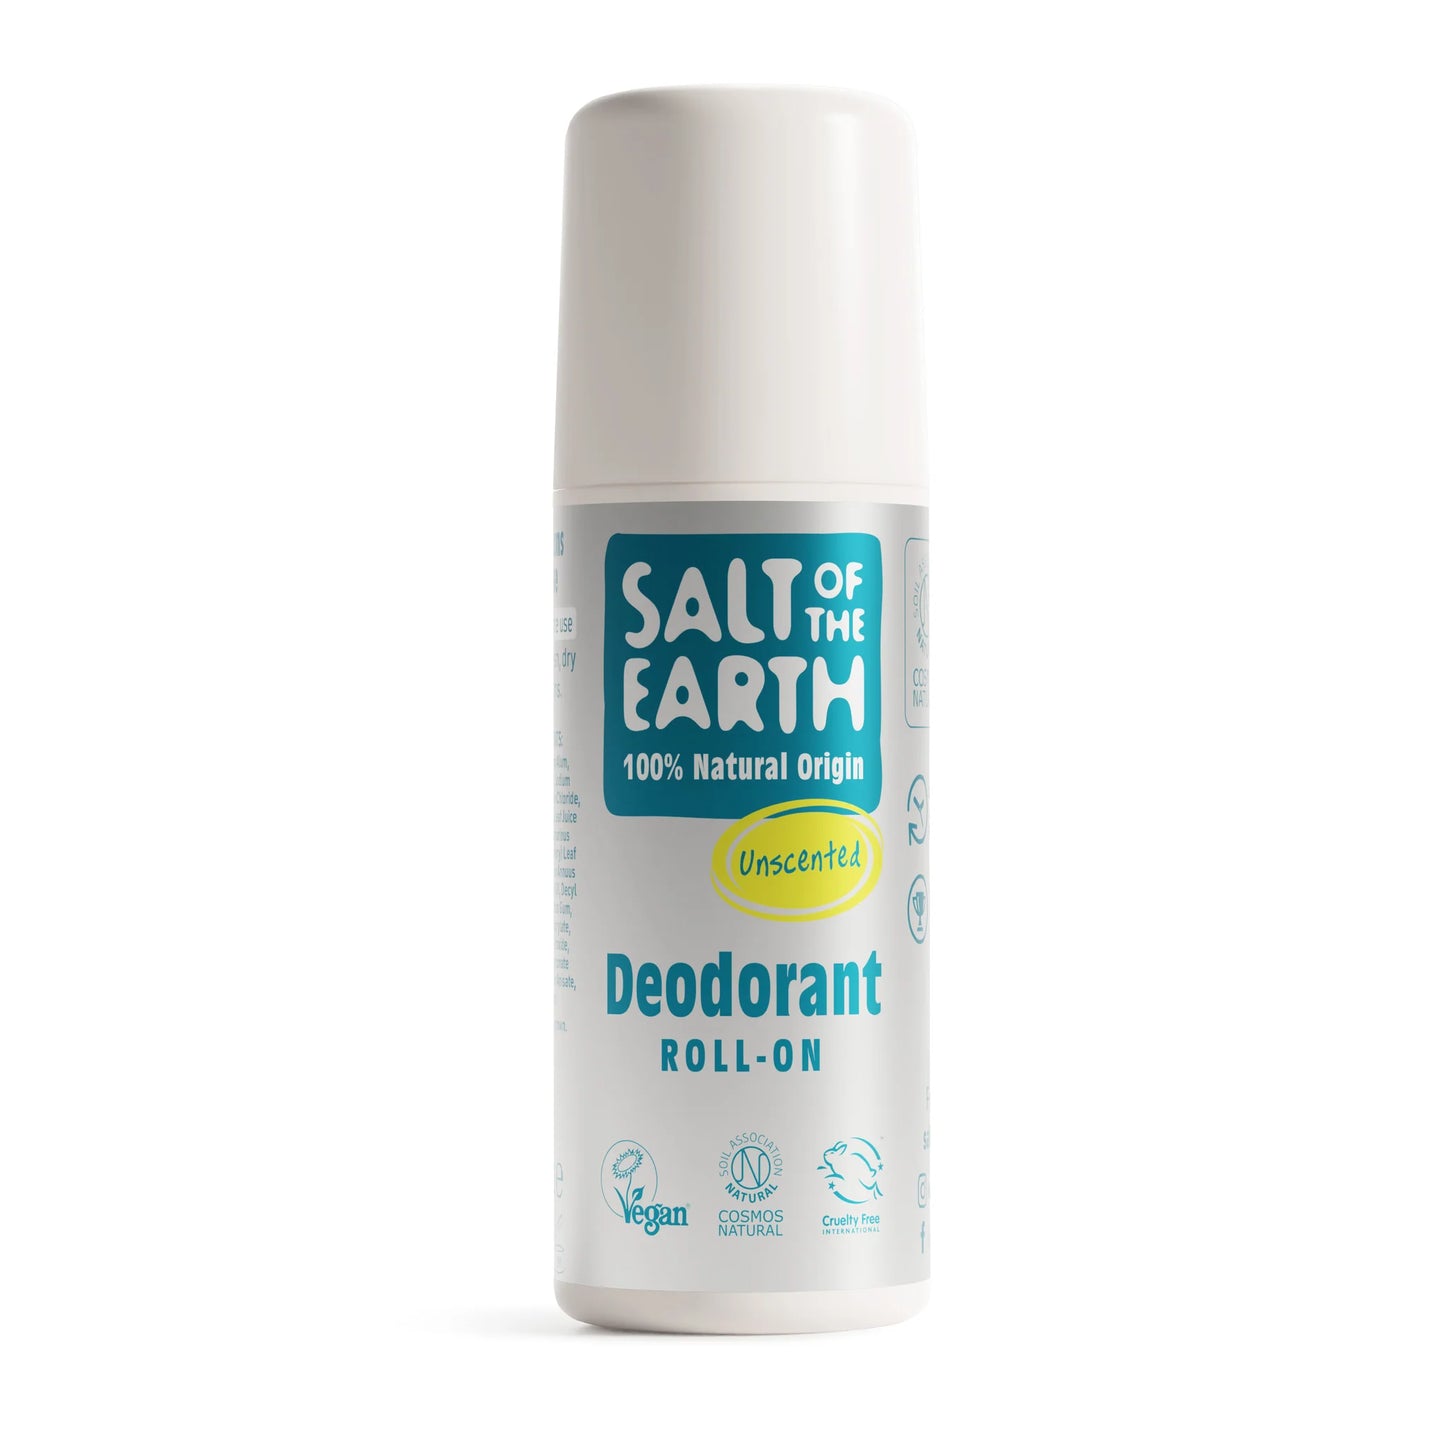 Salt of the Earth Deodorant Roll On 75ml - Unscented